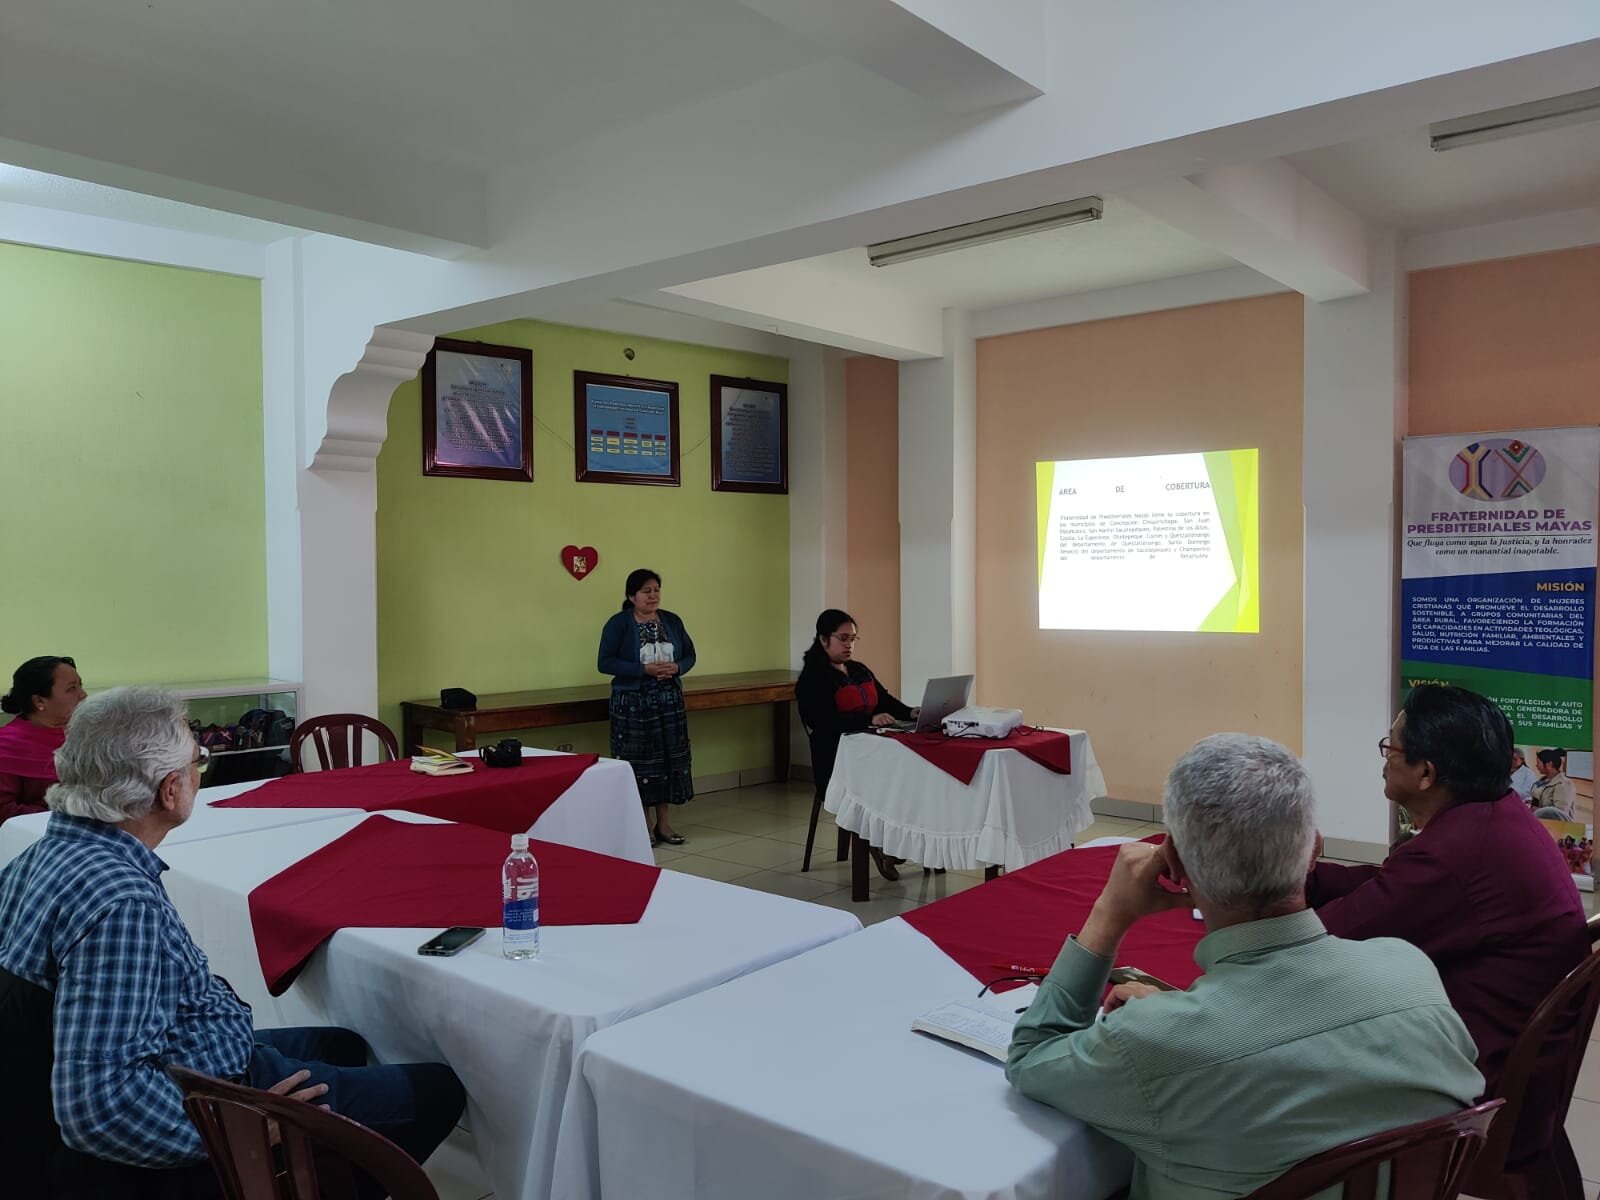 ✨New Possibilities✨
On our most recent trip to Guatemala, we met with leaders and members of a Microcredit Association in Quetzaltenango, Guatemala - Fraternidad de Presbyterales Mayas. 
.
Fraternidad has a well-established self-management style prog